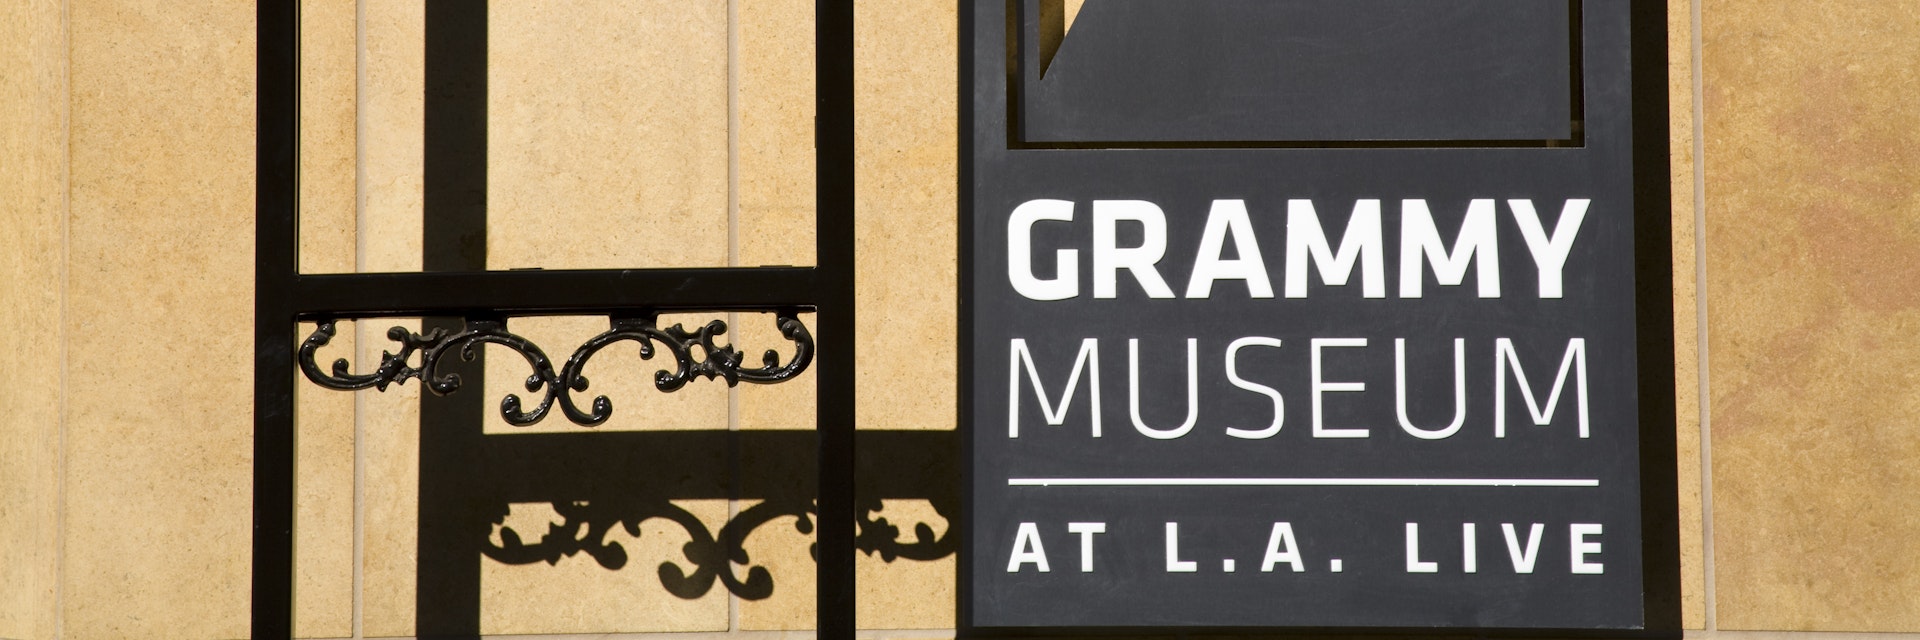 Grammy Museum at L.A. Live.